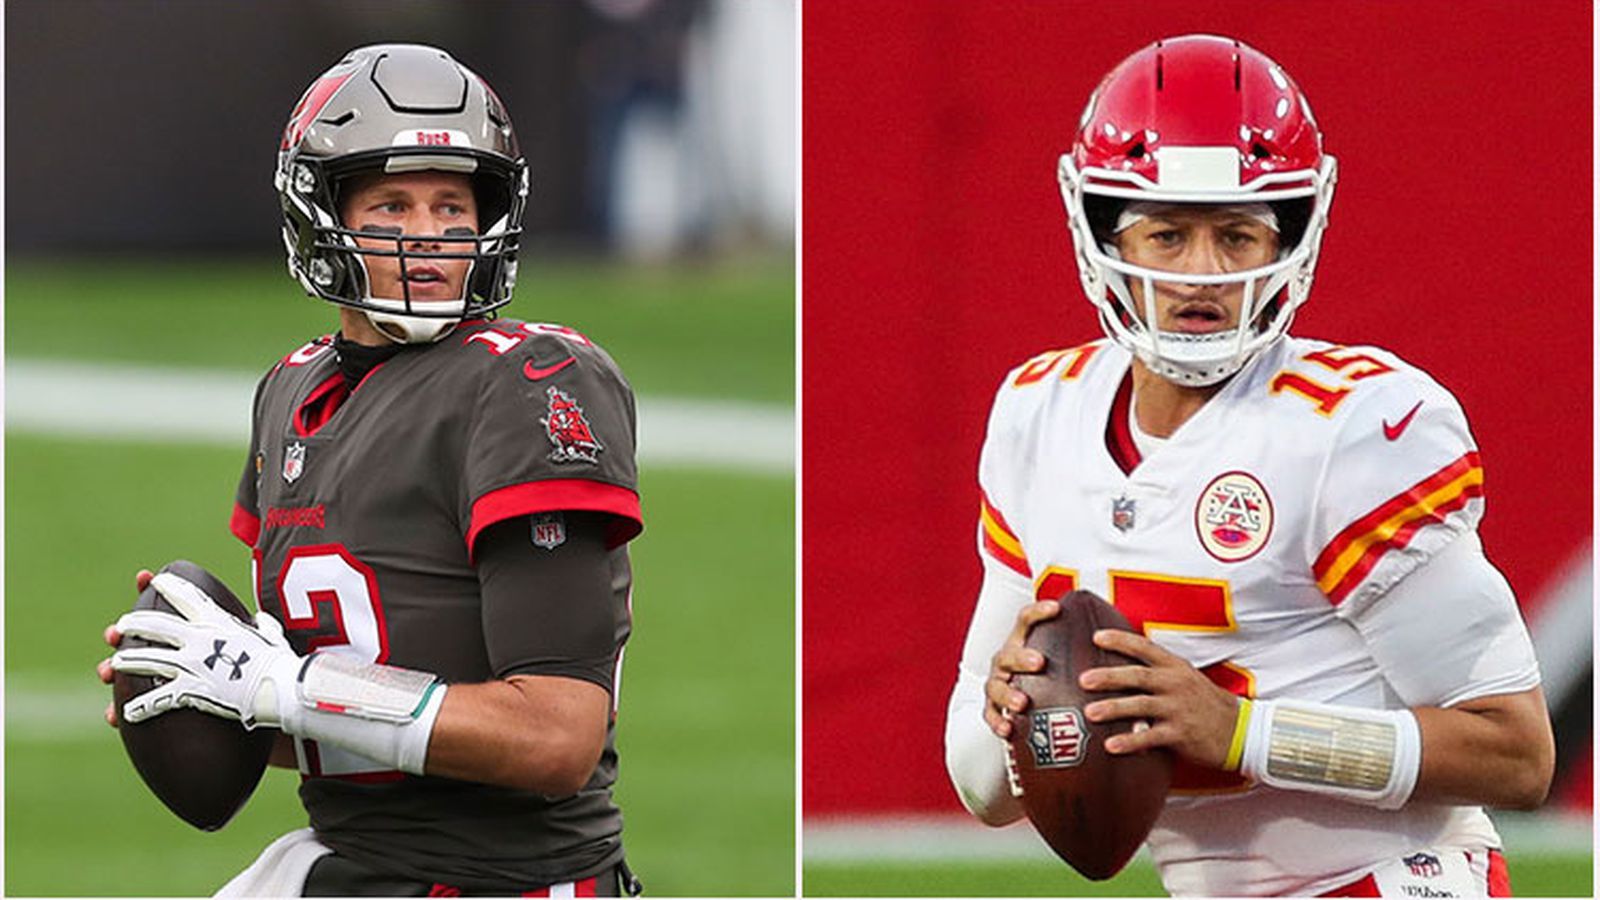 Can Brady Mahomes Top These Heralded Super Bowl QB Matchups?